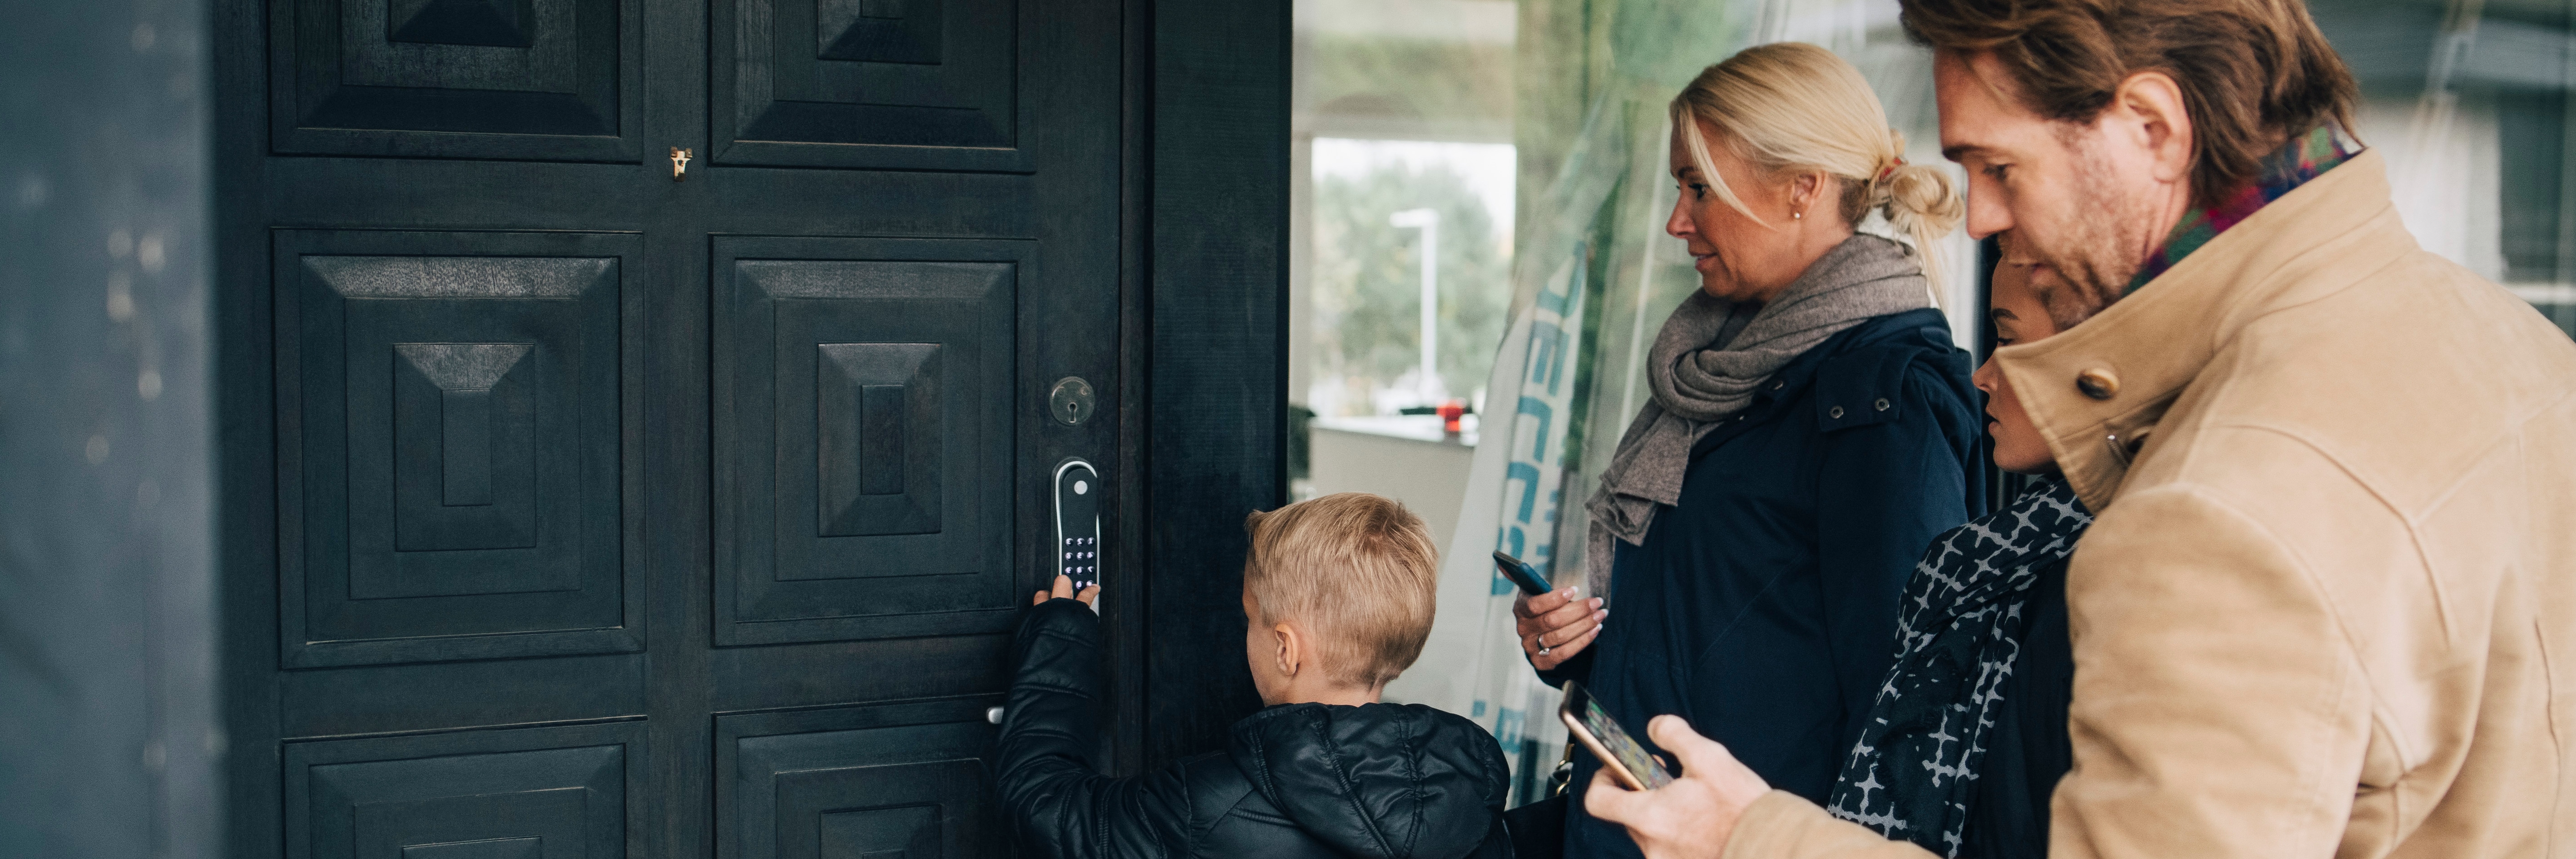 Family using smart lock at front door outside of home